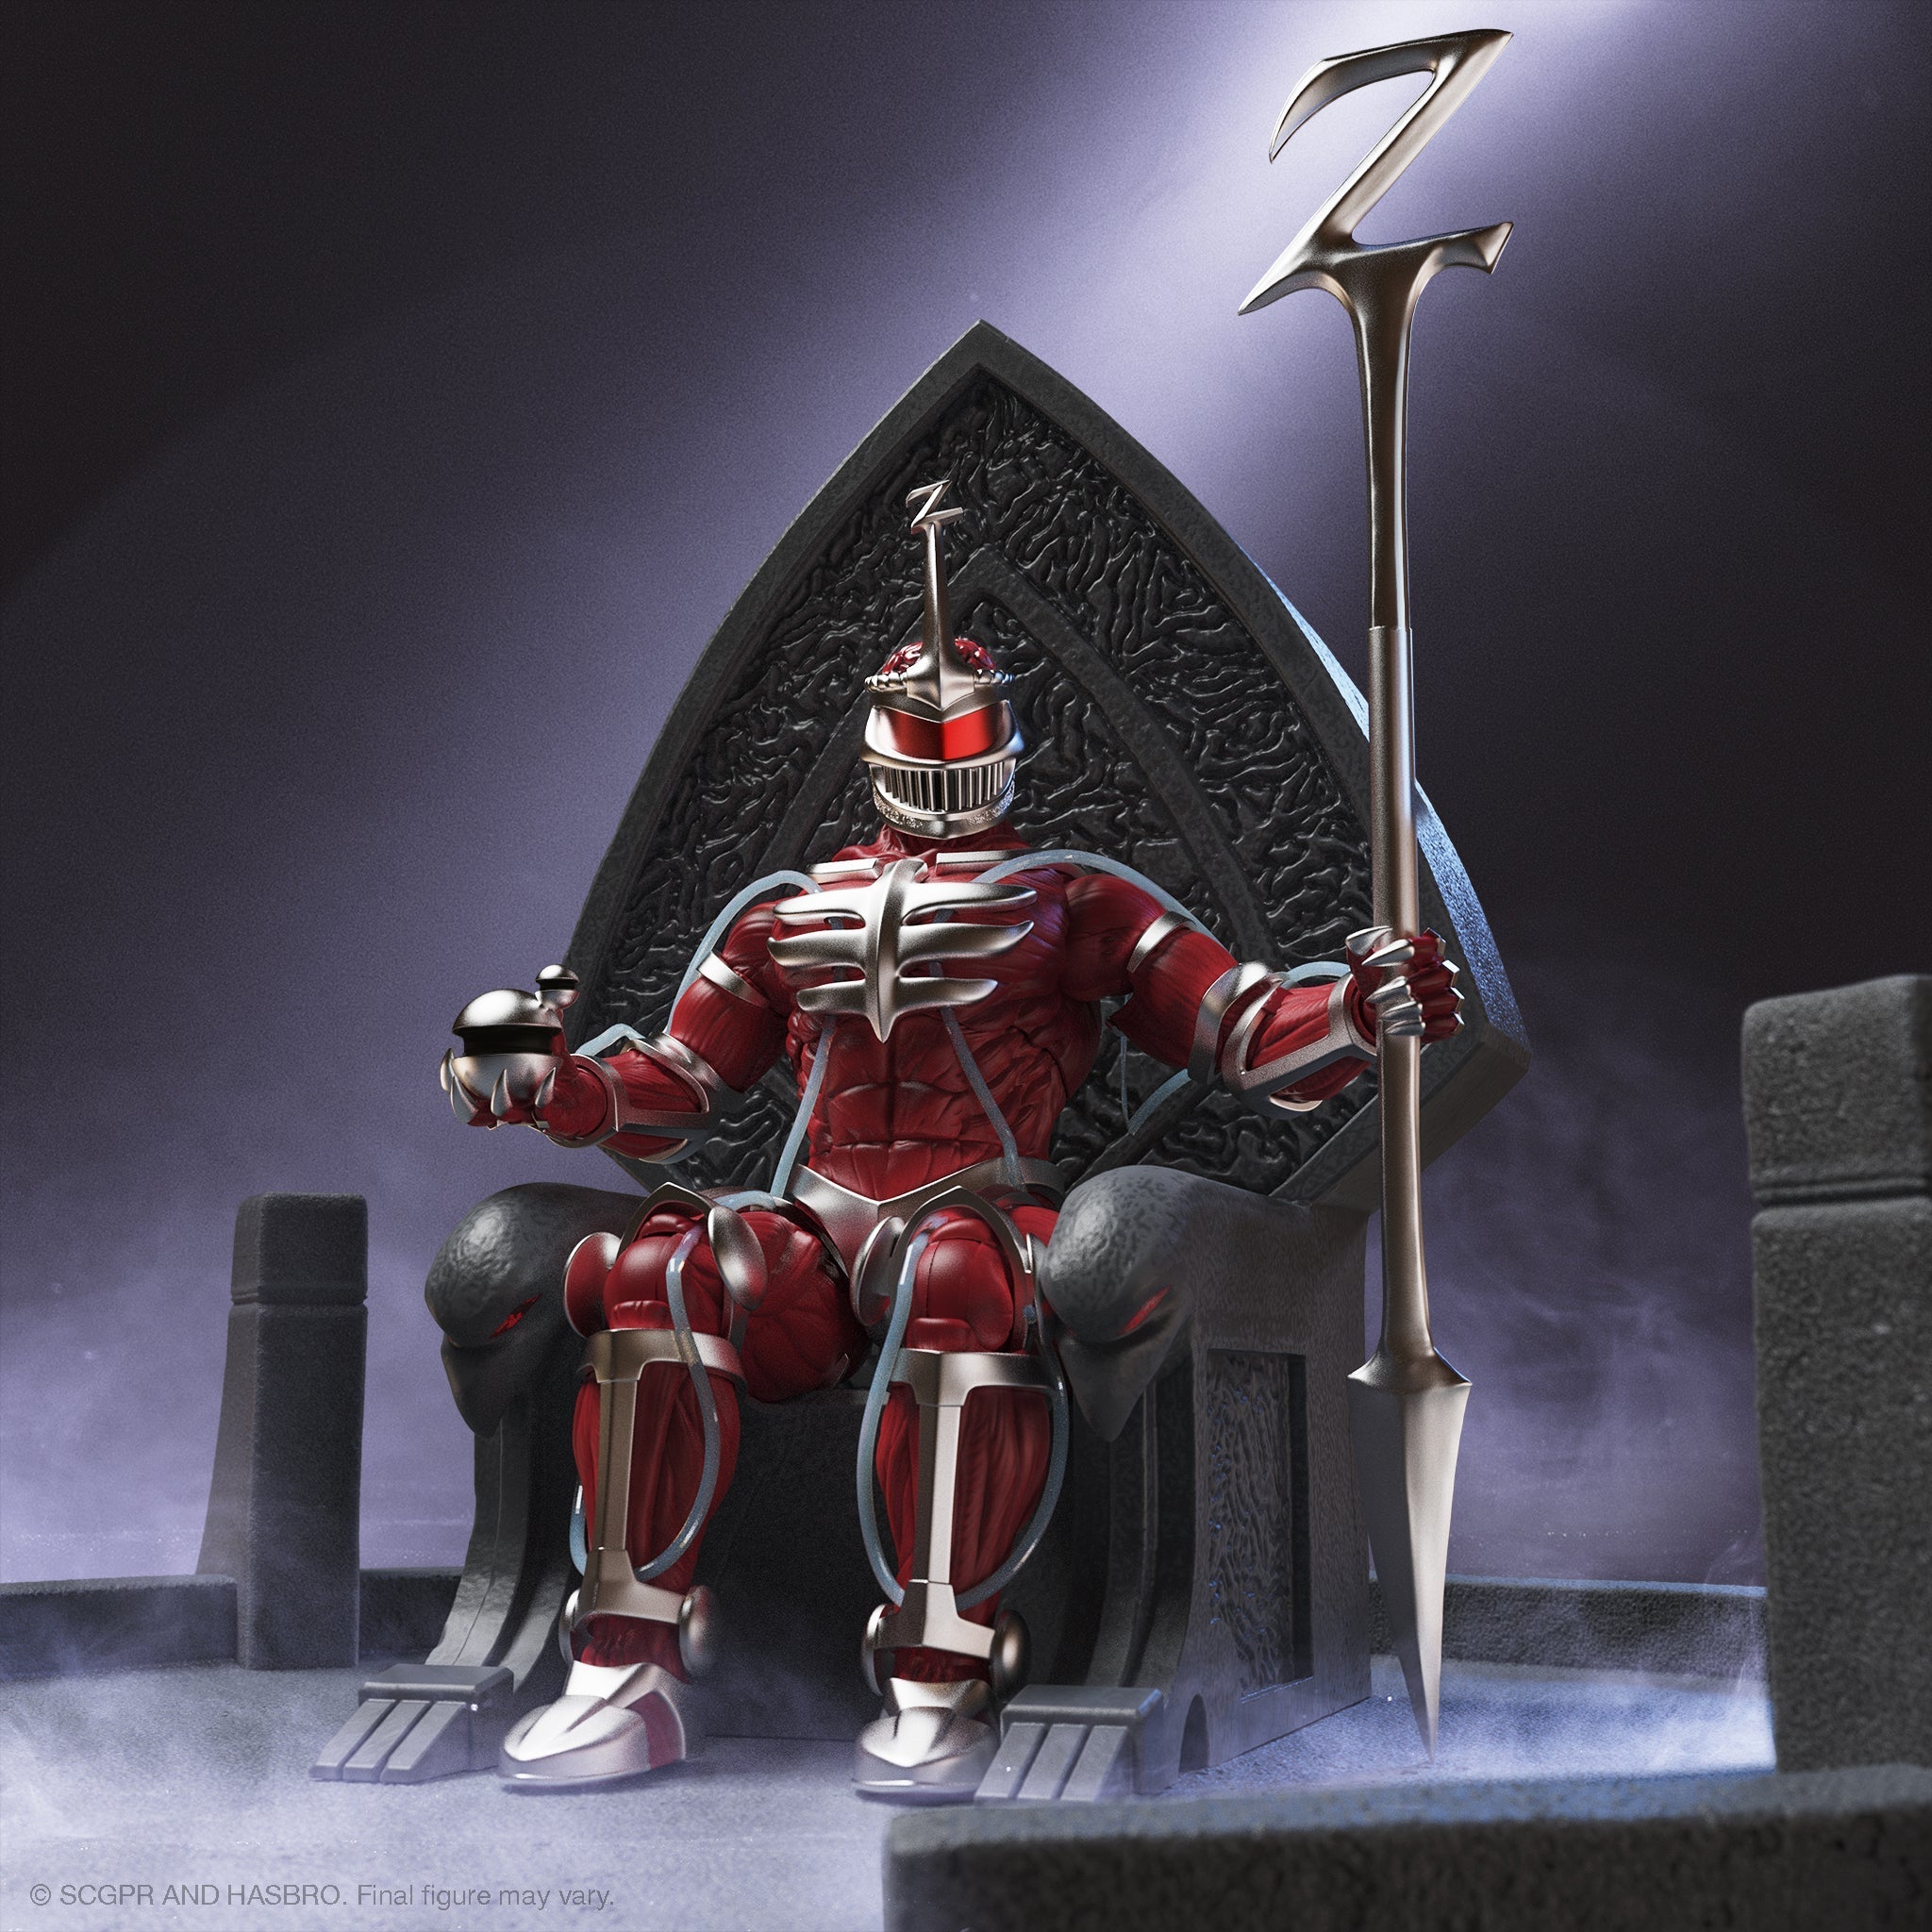 Super7 - Mighty Morphin Power Rangers ULTIMATES! - Wave 3 - Lord Zedd's Throne - Marvelous Toys